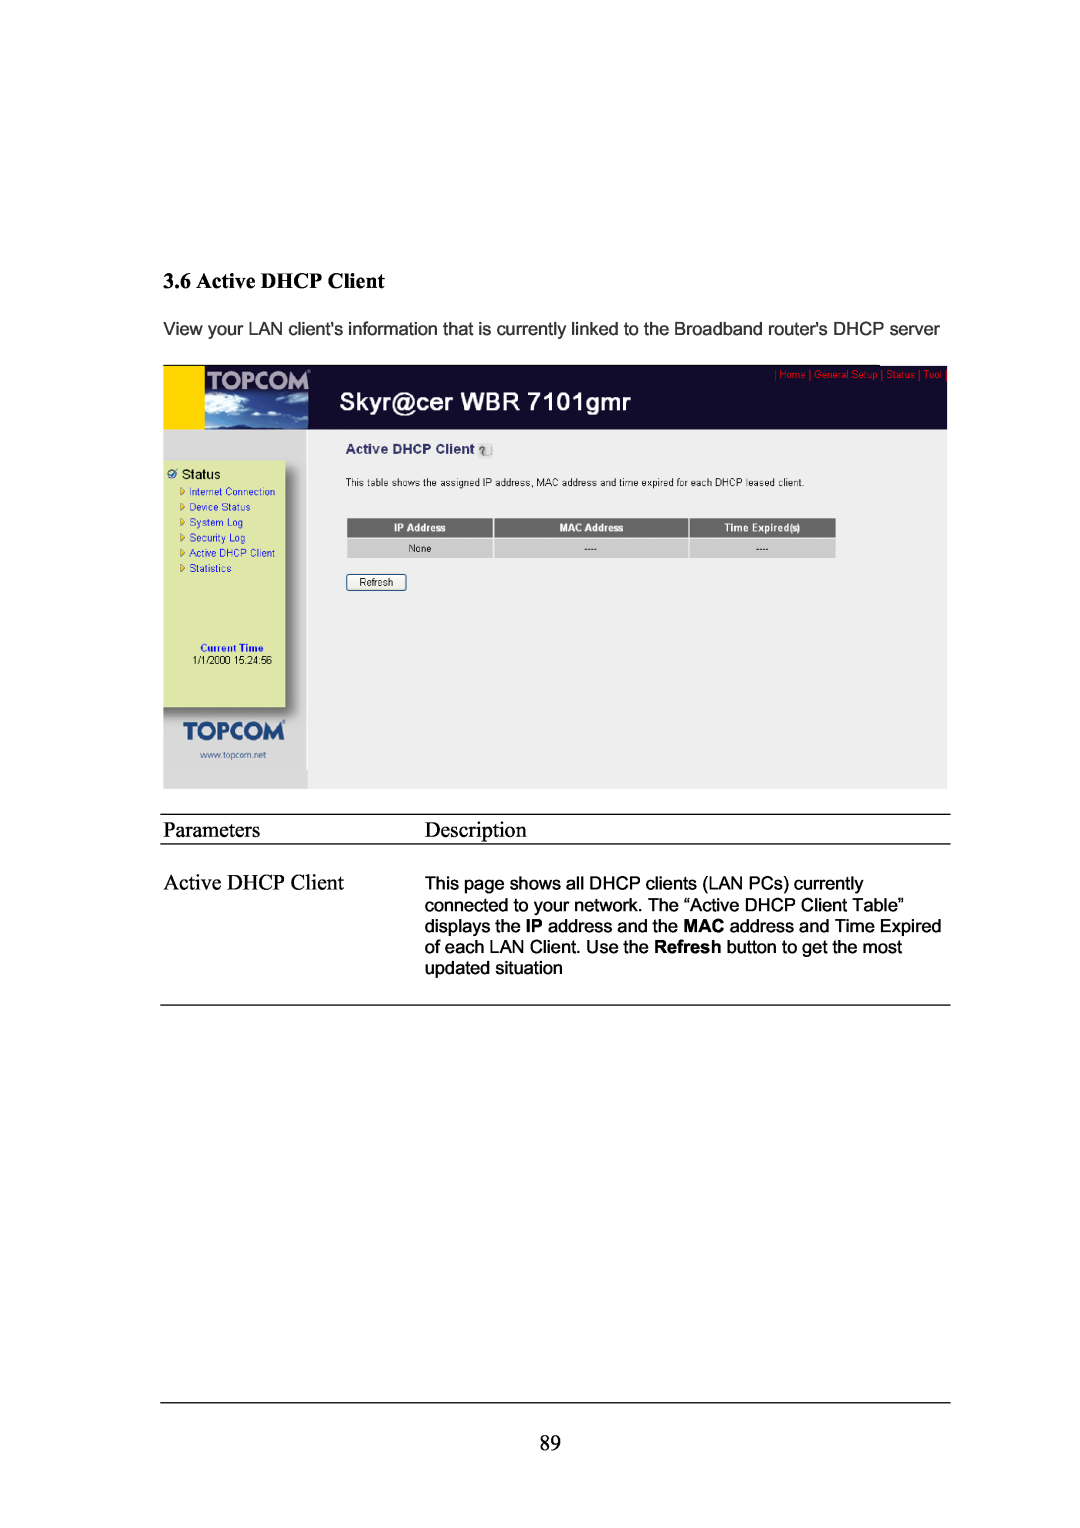 Topcom WBR 7101GMR manual Active DHCP Client, This page shows all DHCP clients LAN PCs currently, updated situation 